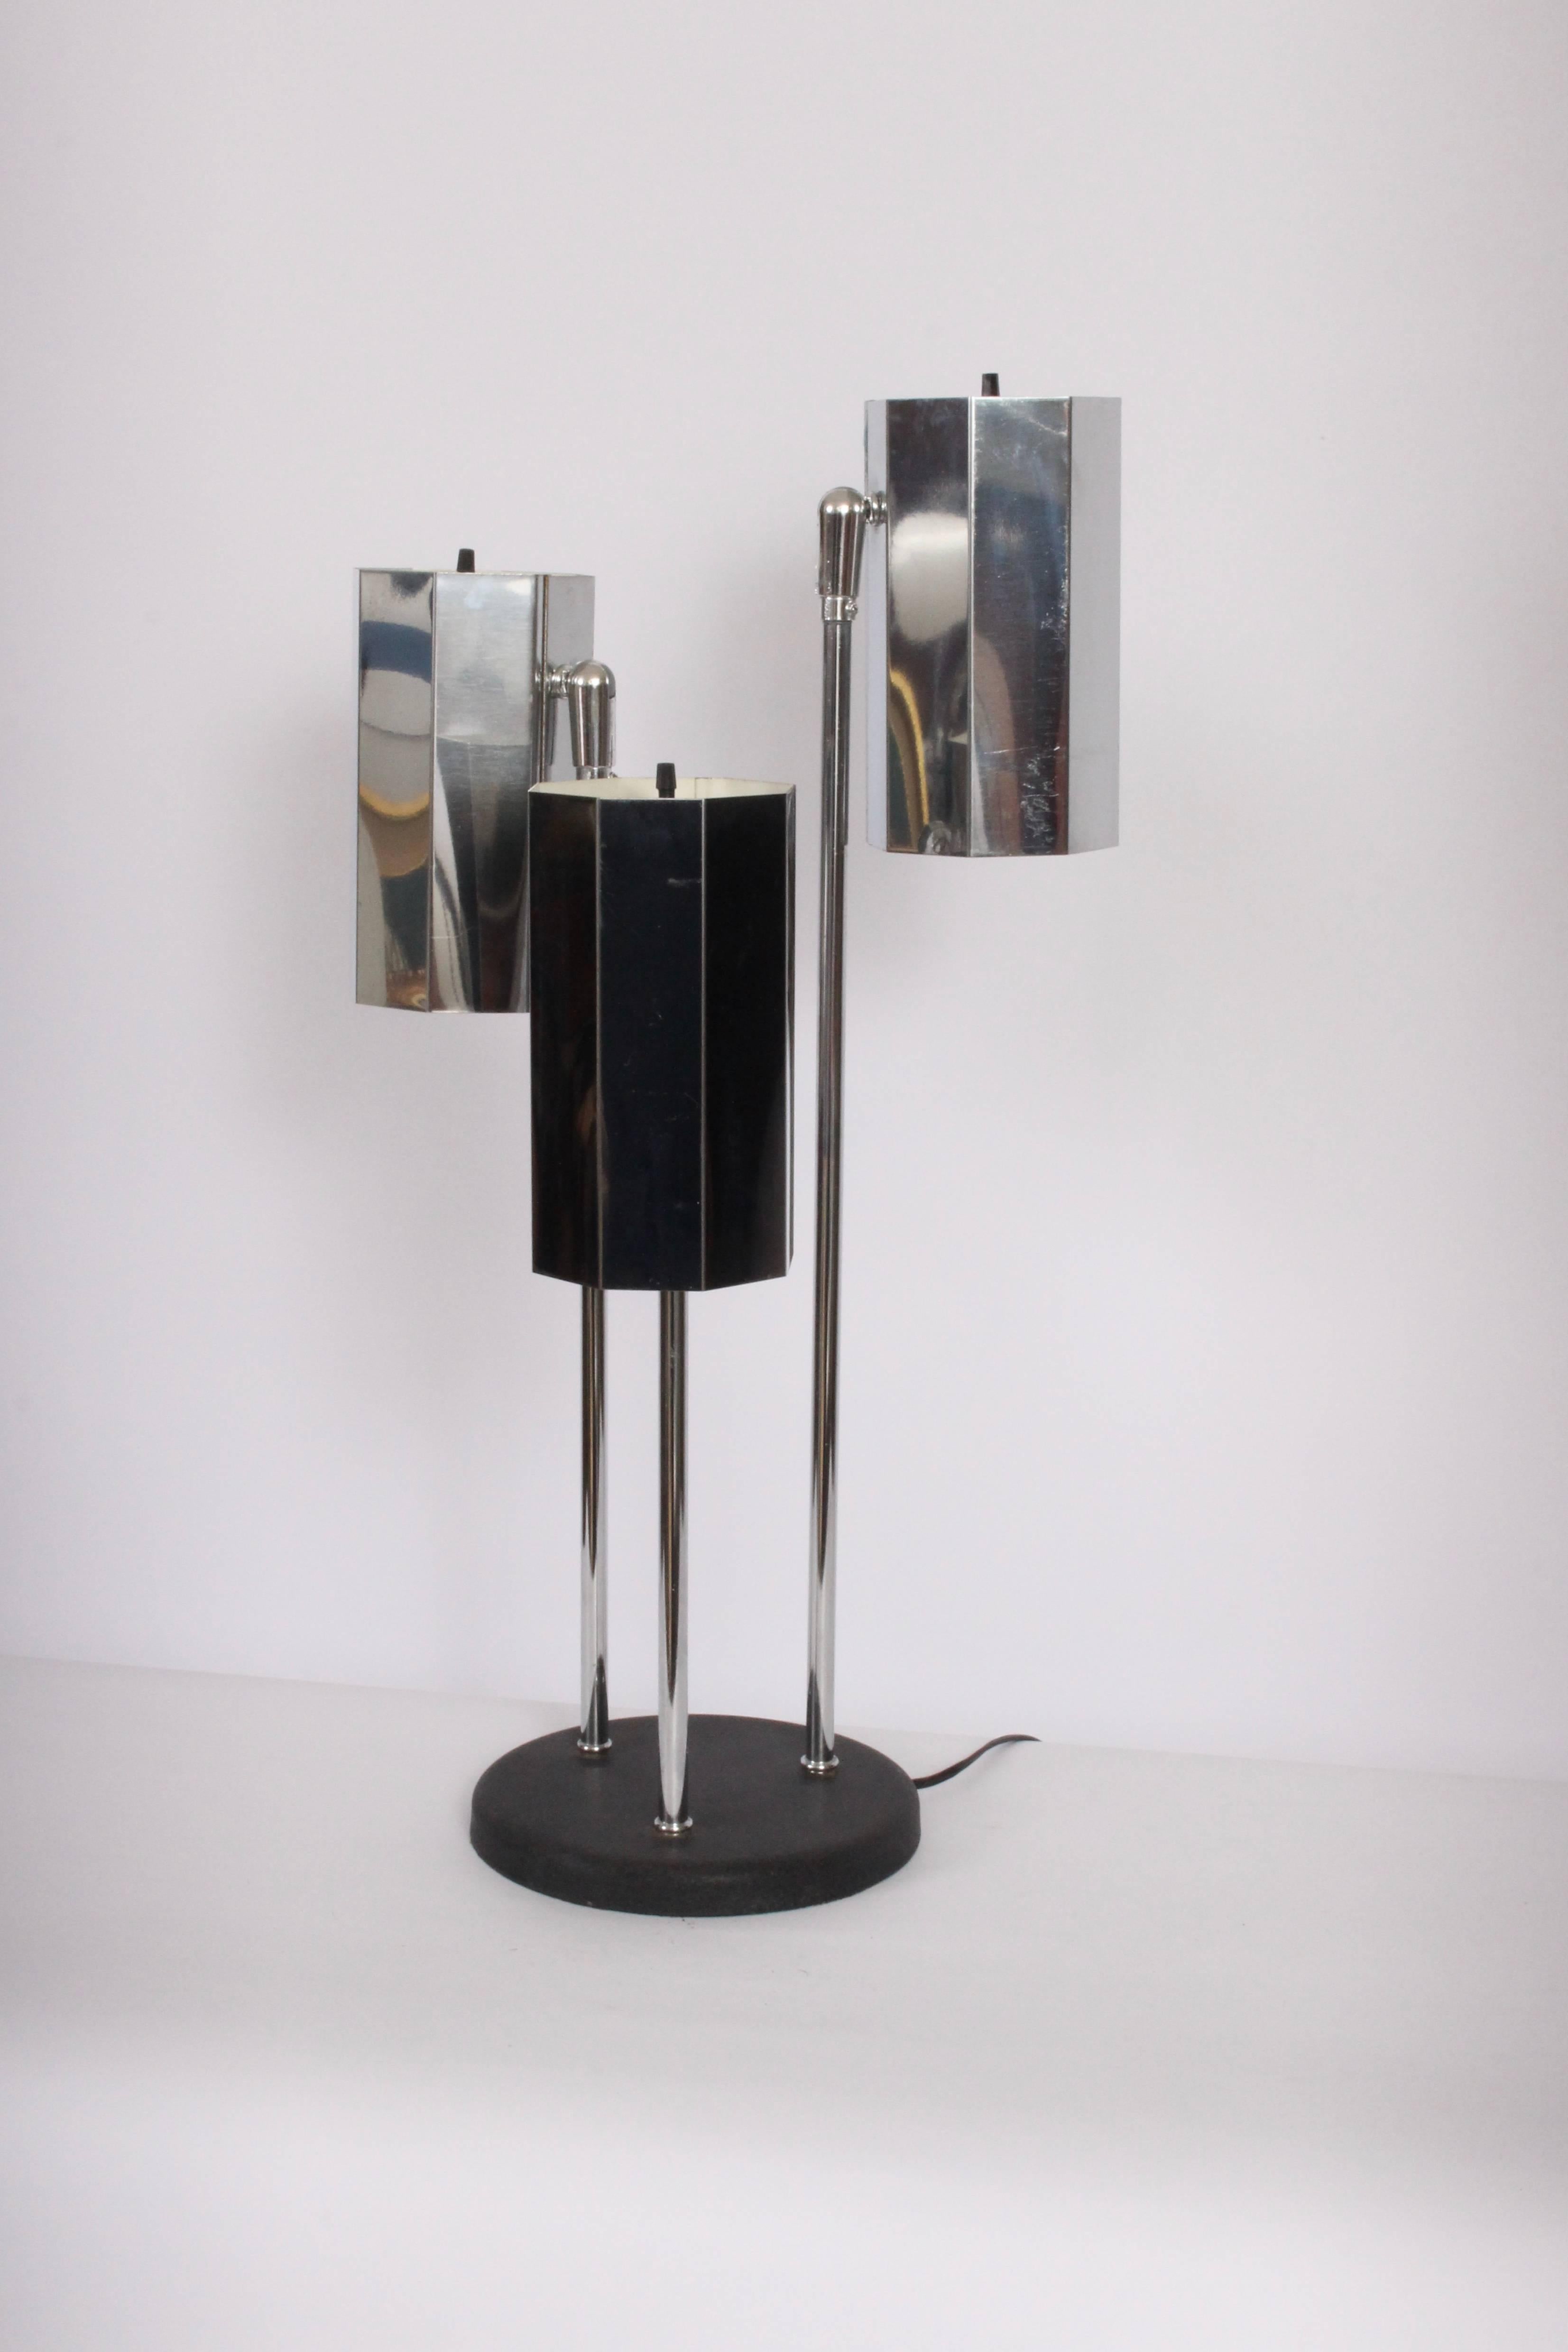 Circa 1970 trl-shade reading table lamp with reflective octagonal chrome plate shades, attributed Koch & Lowy. Featuring chrome stem, three pivoting, eight-sided chrome plate cylinder exterior shades, off-white enameled shade interior and round